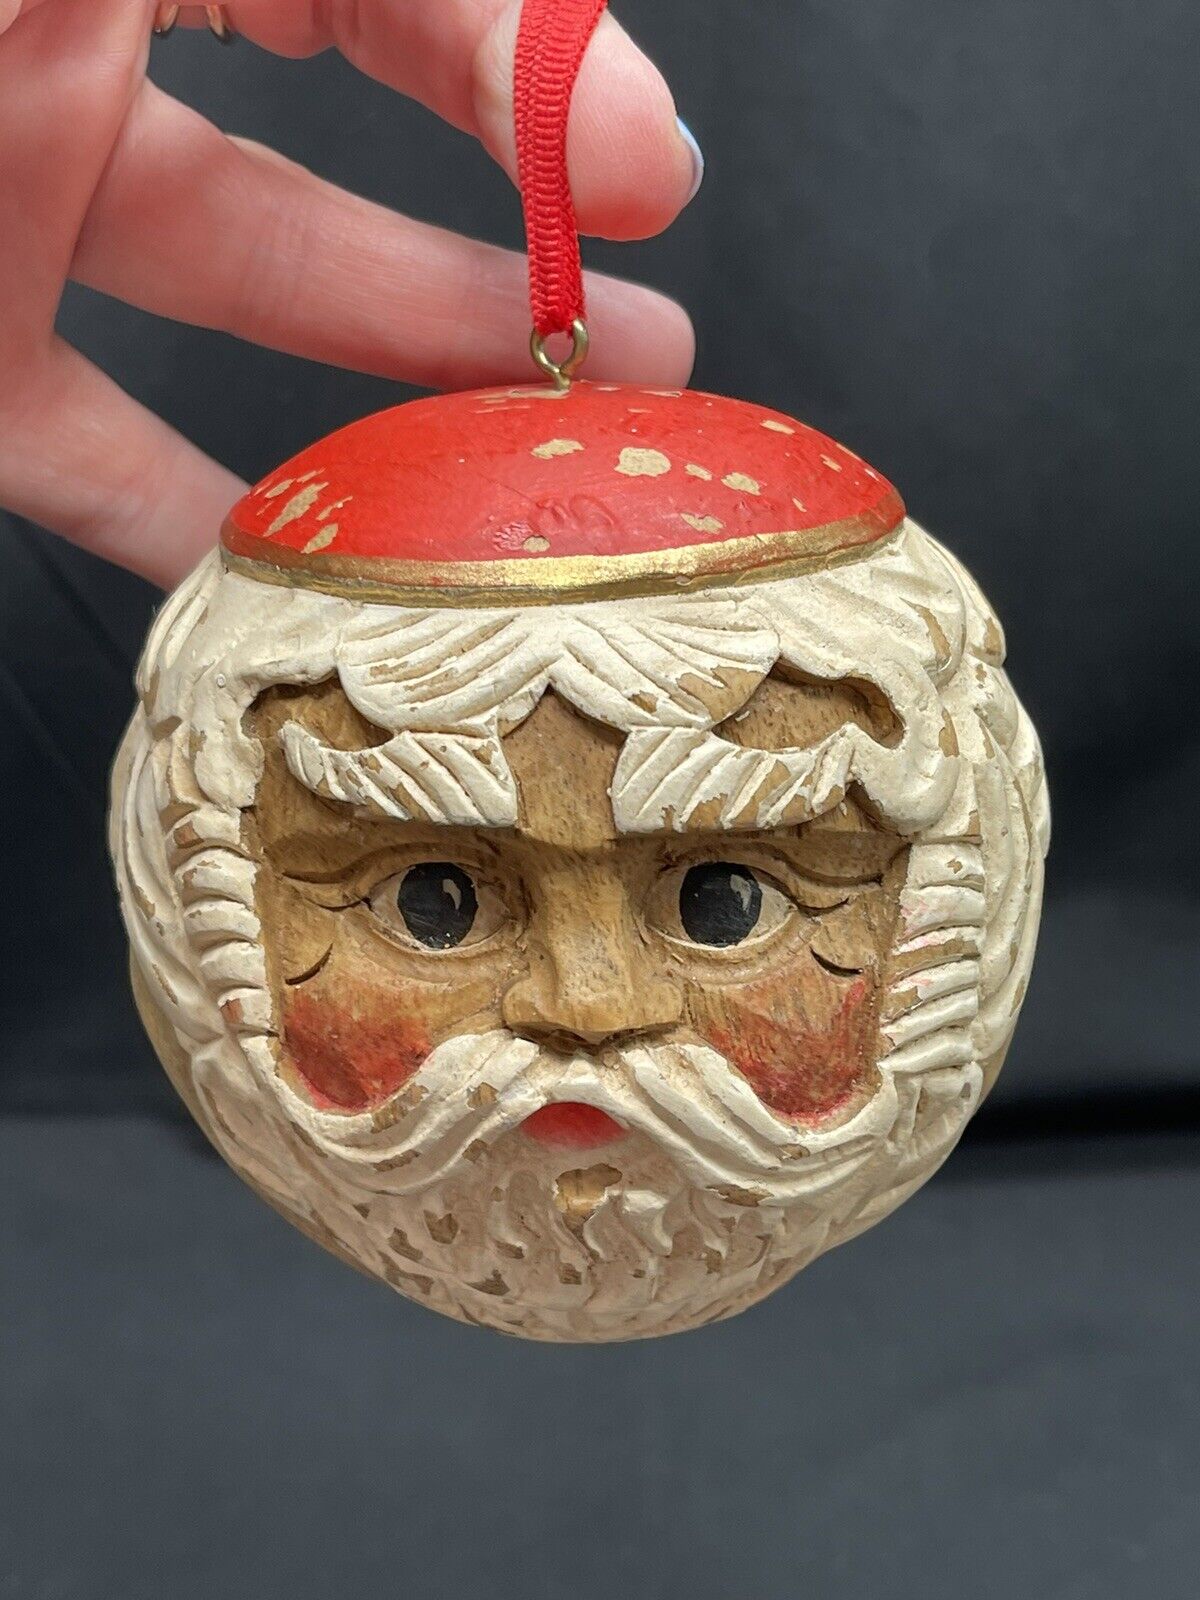 VTG Hand Carved Santa Claus Head, Solid Wooden Christmas Ornament Ball